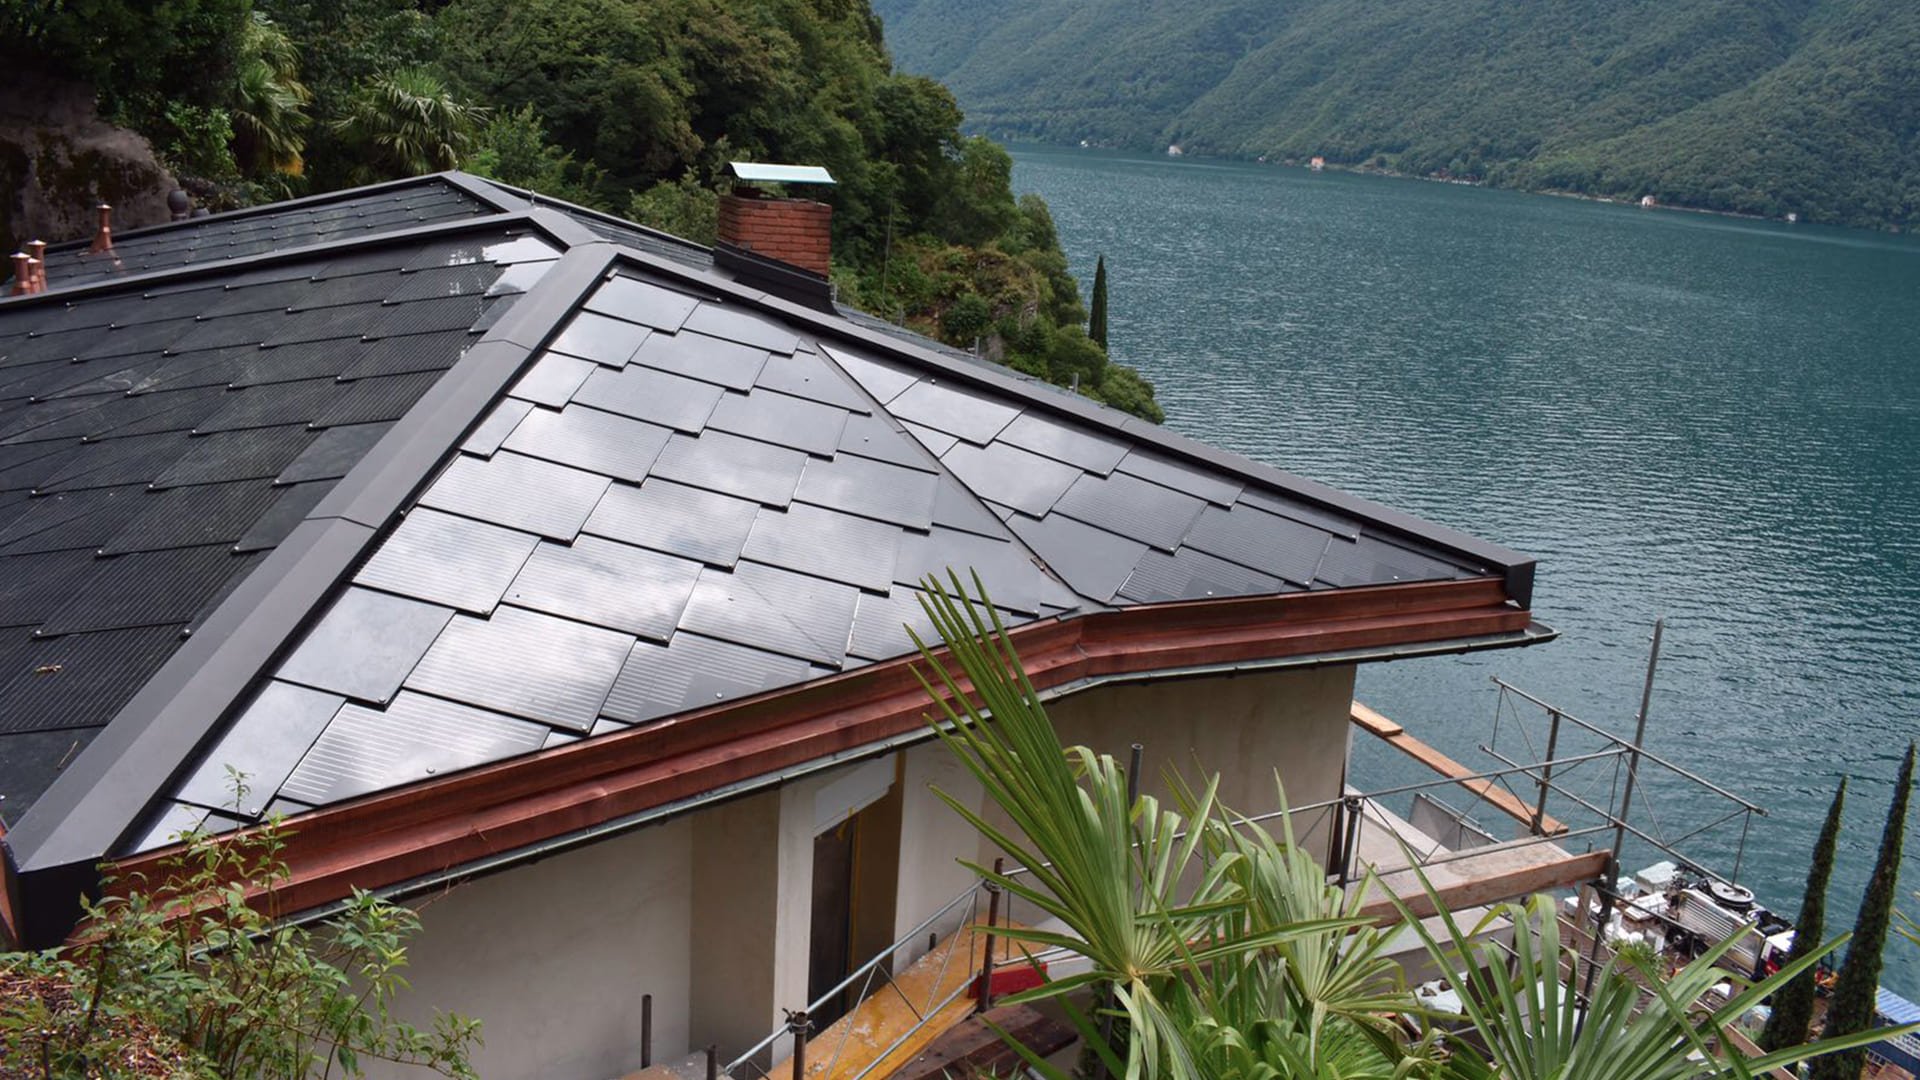 SunStyle solar tiles create a beautiful and powerful solar roof on this single family home